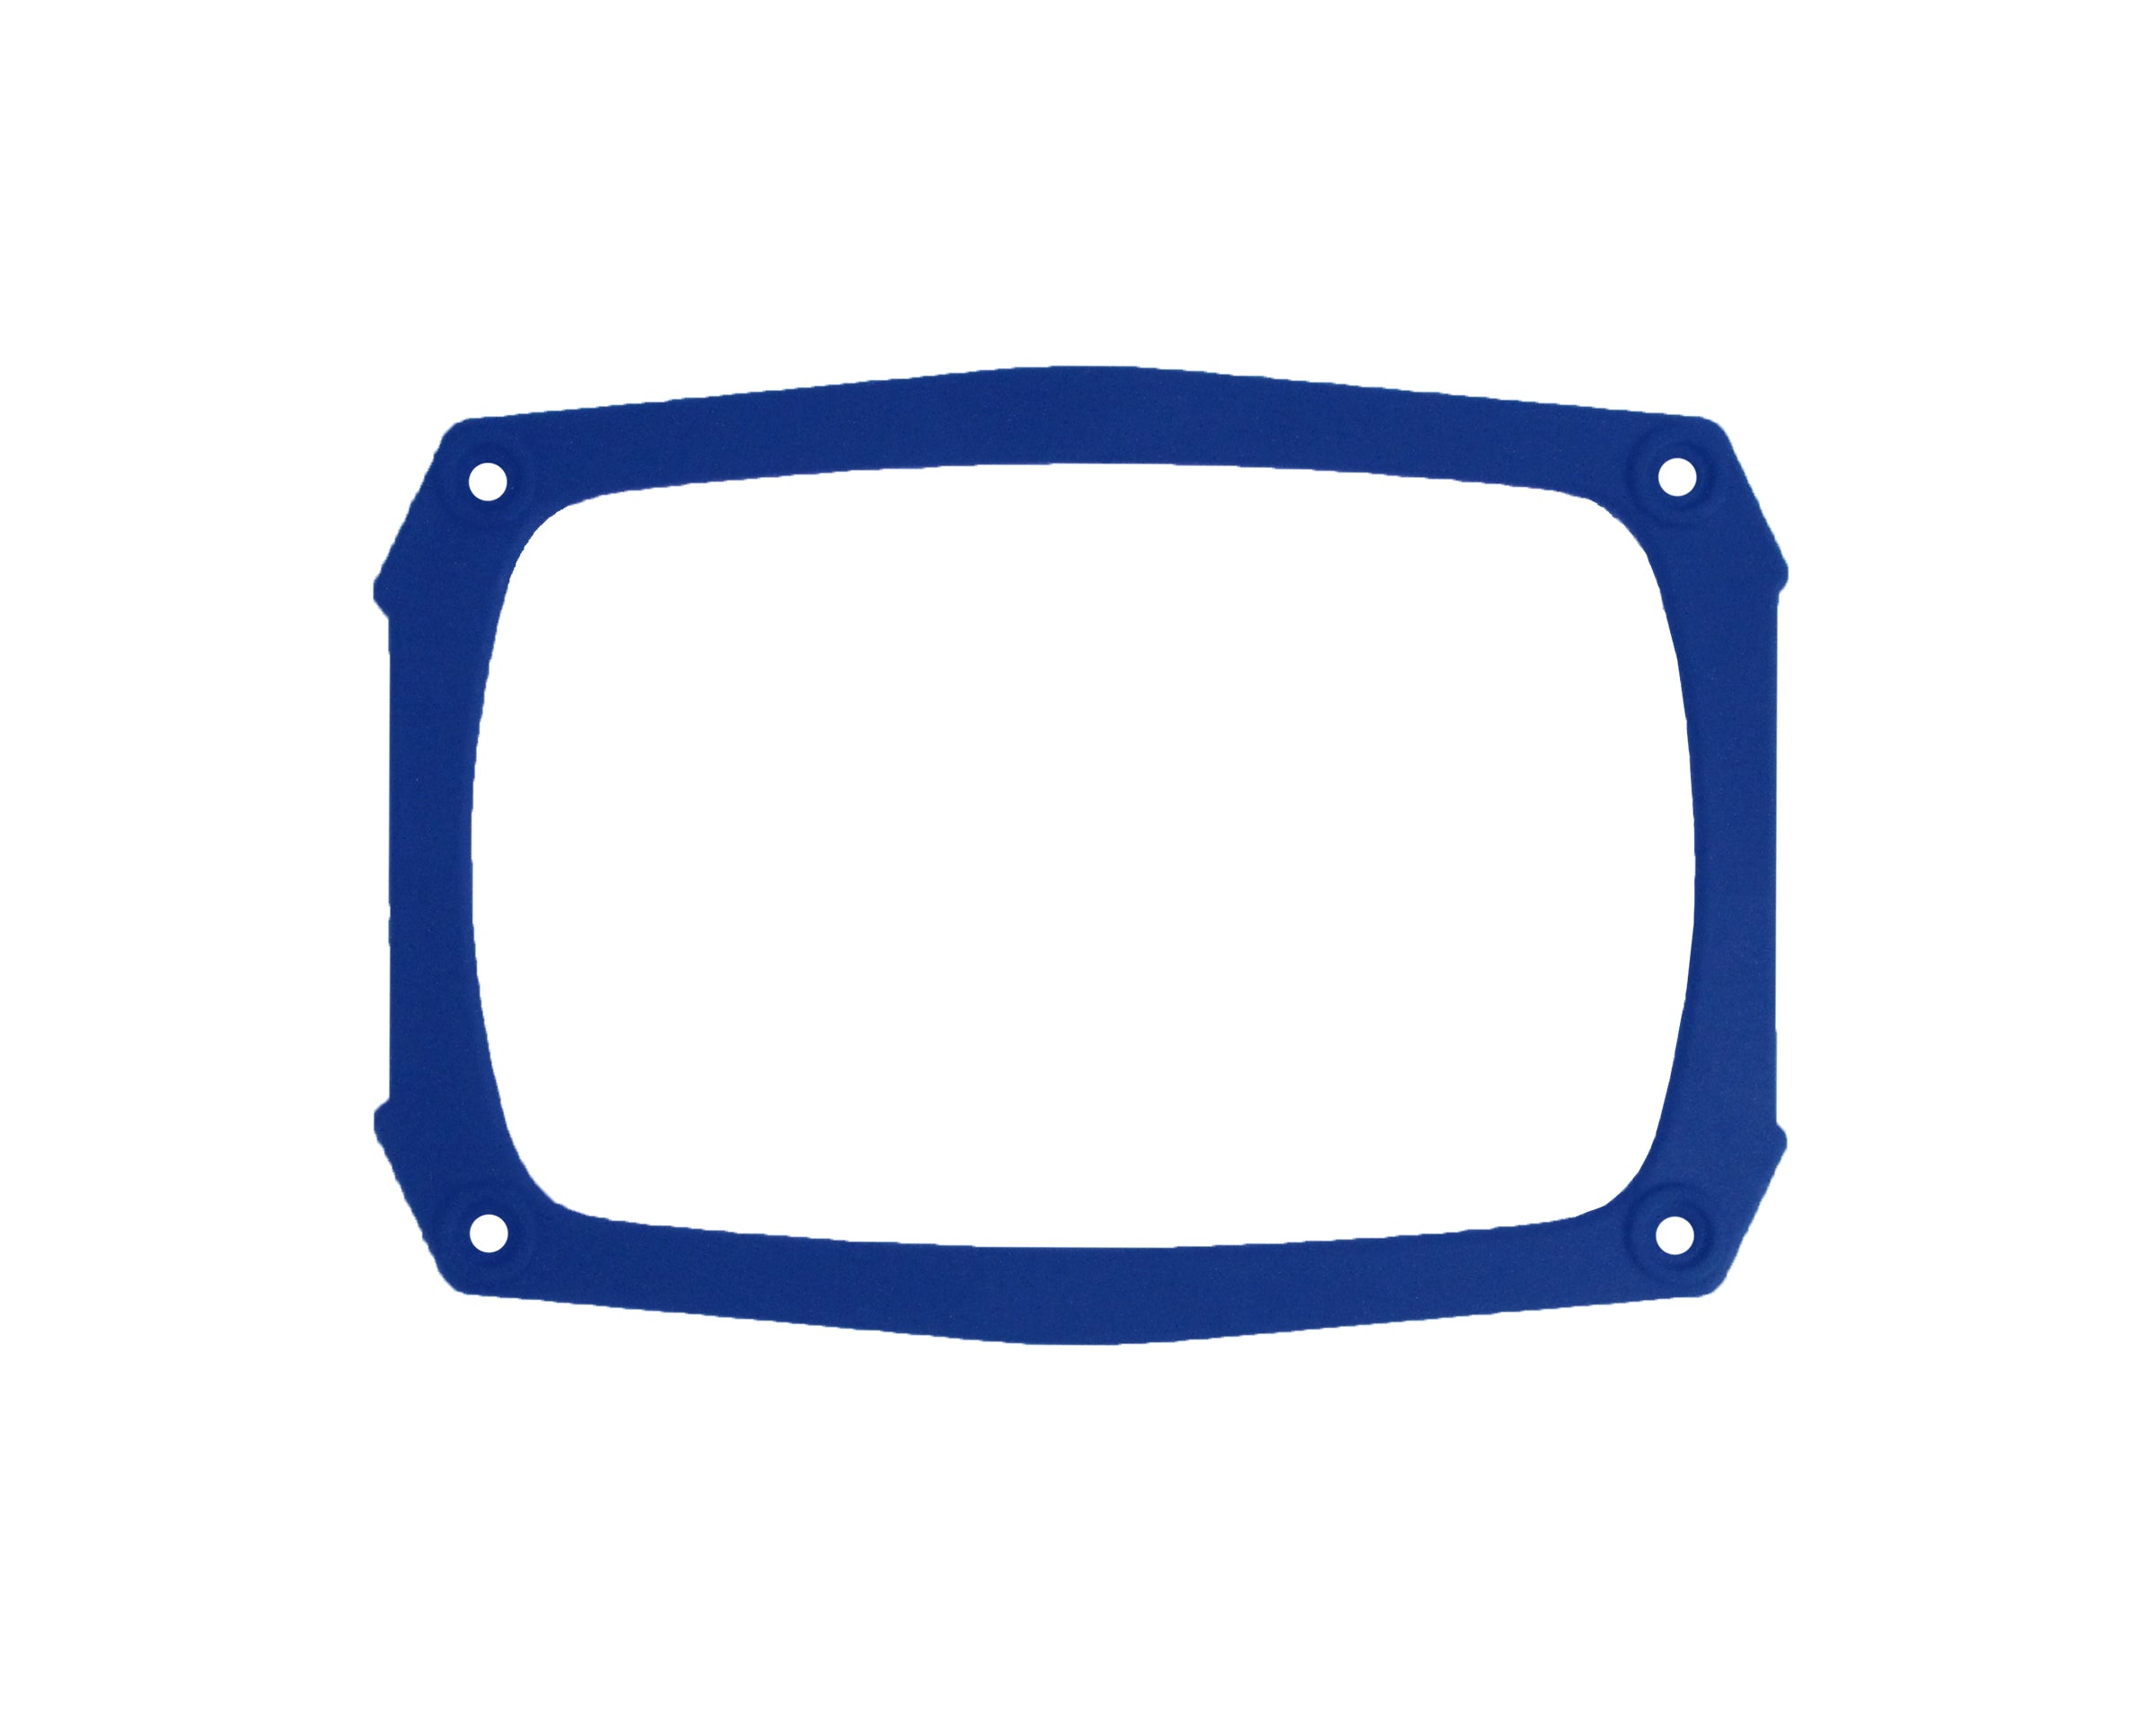 Clearview Side Mirror Blue Replacement Frame